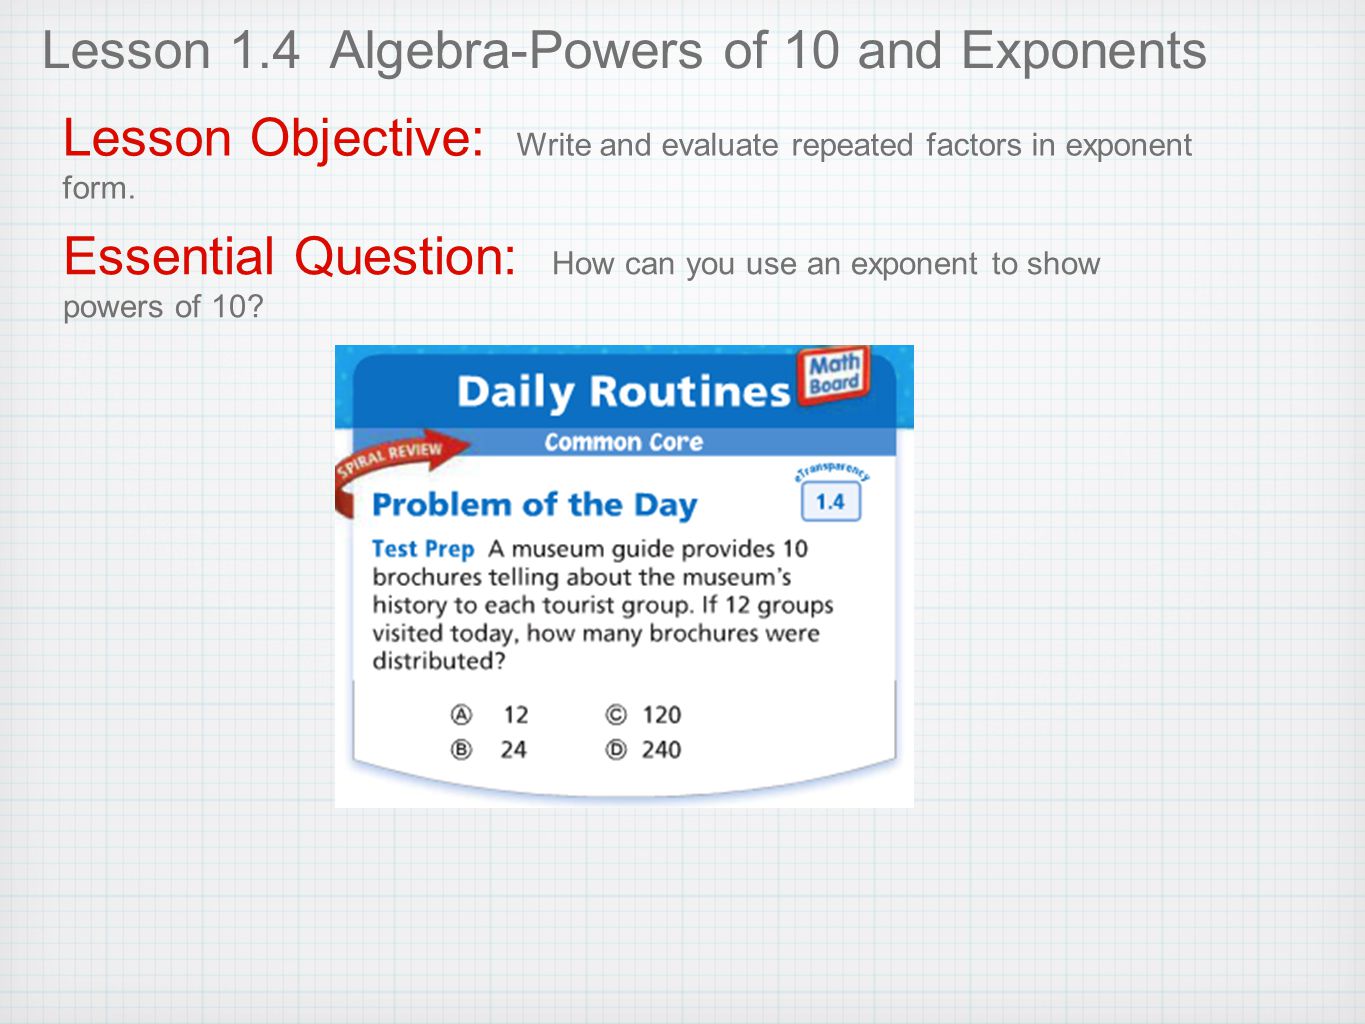 Lesson 1.4 Algebra-Powers of 10 and Exponents